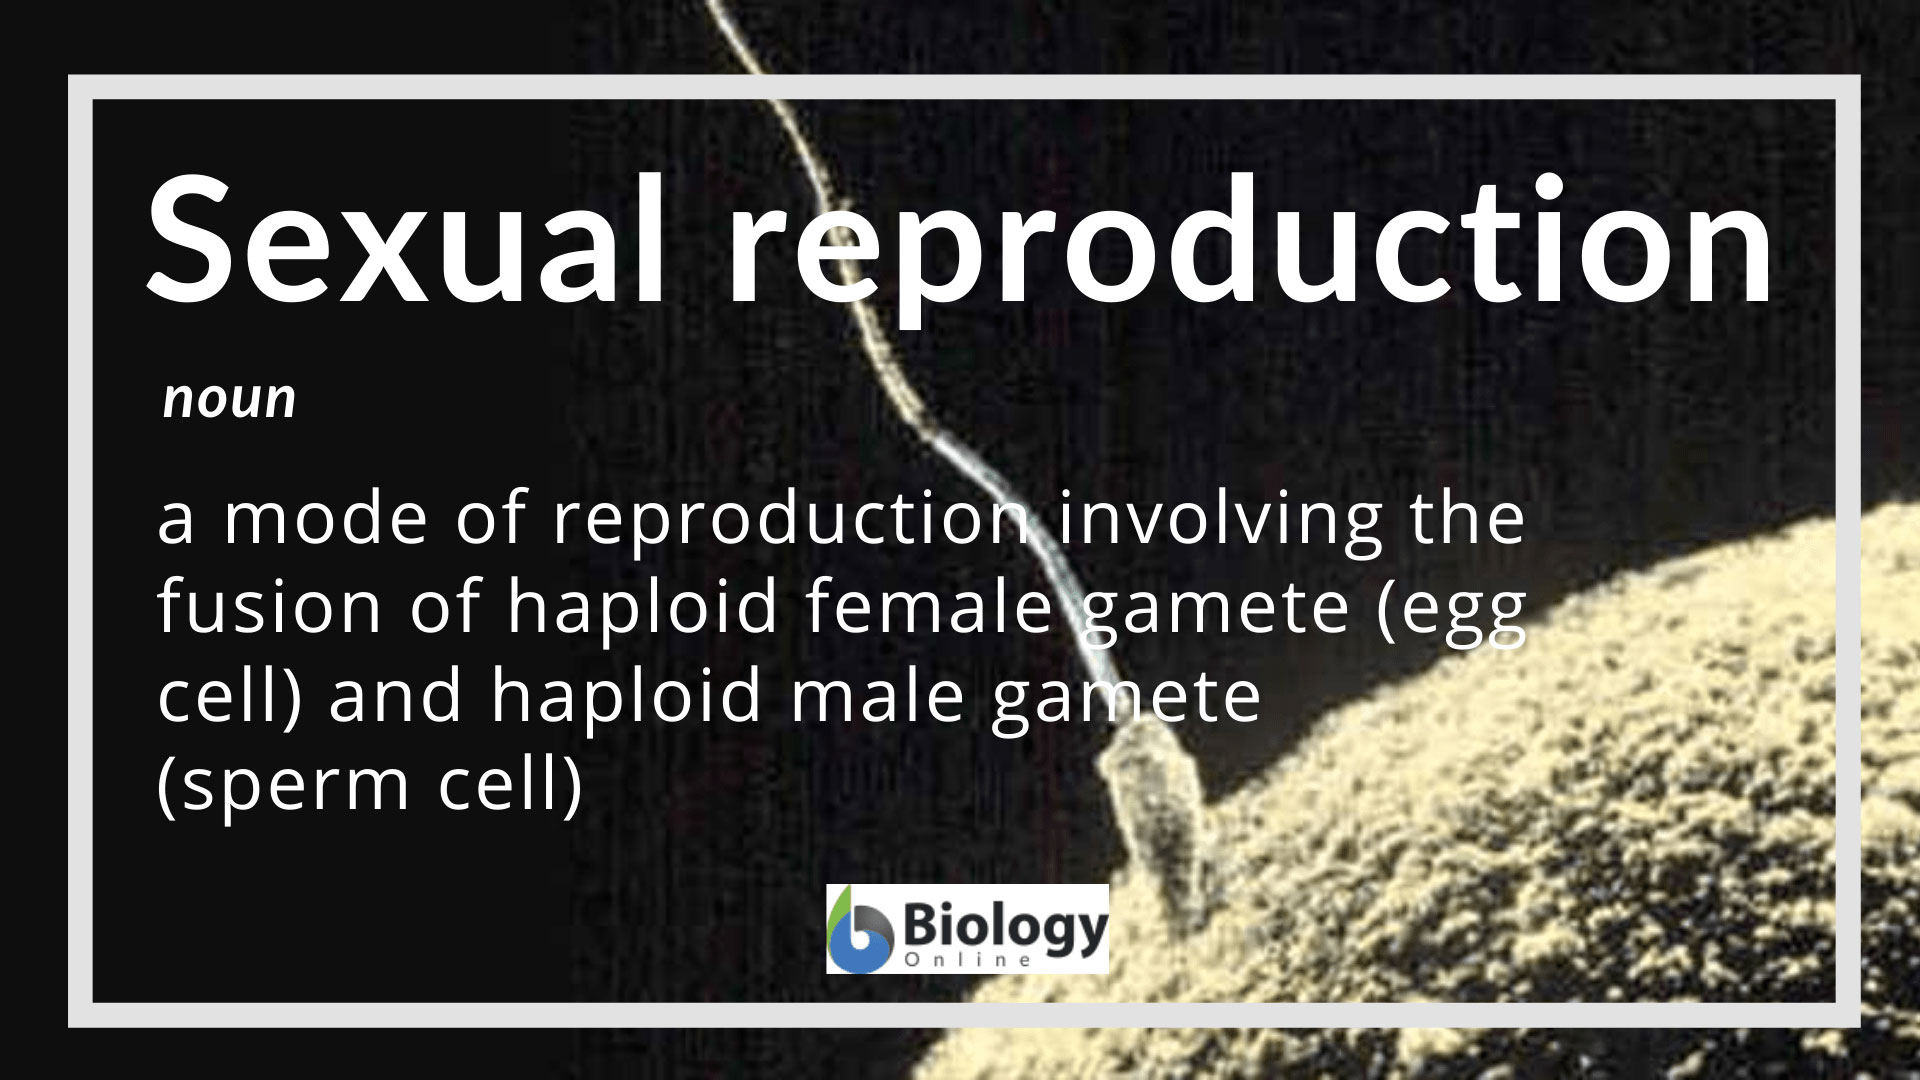 Sexual reproduction - Definition and Examples - Biology Online Dictionary